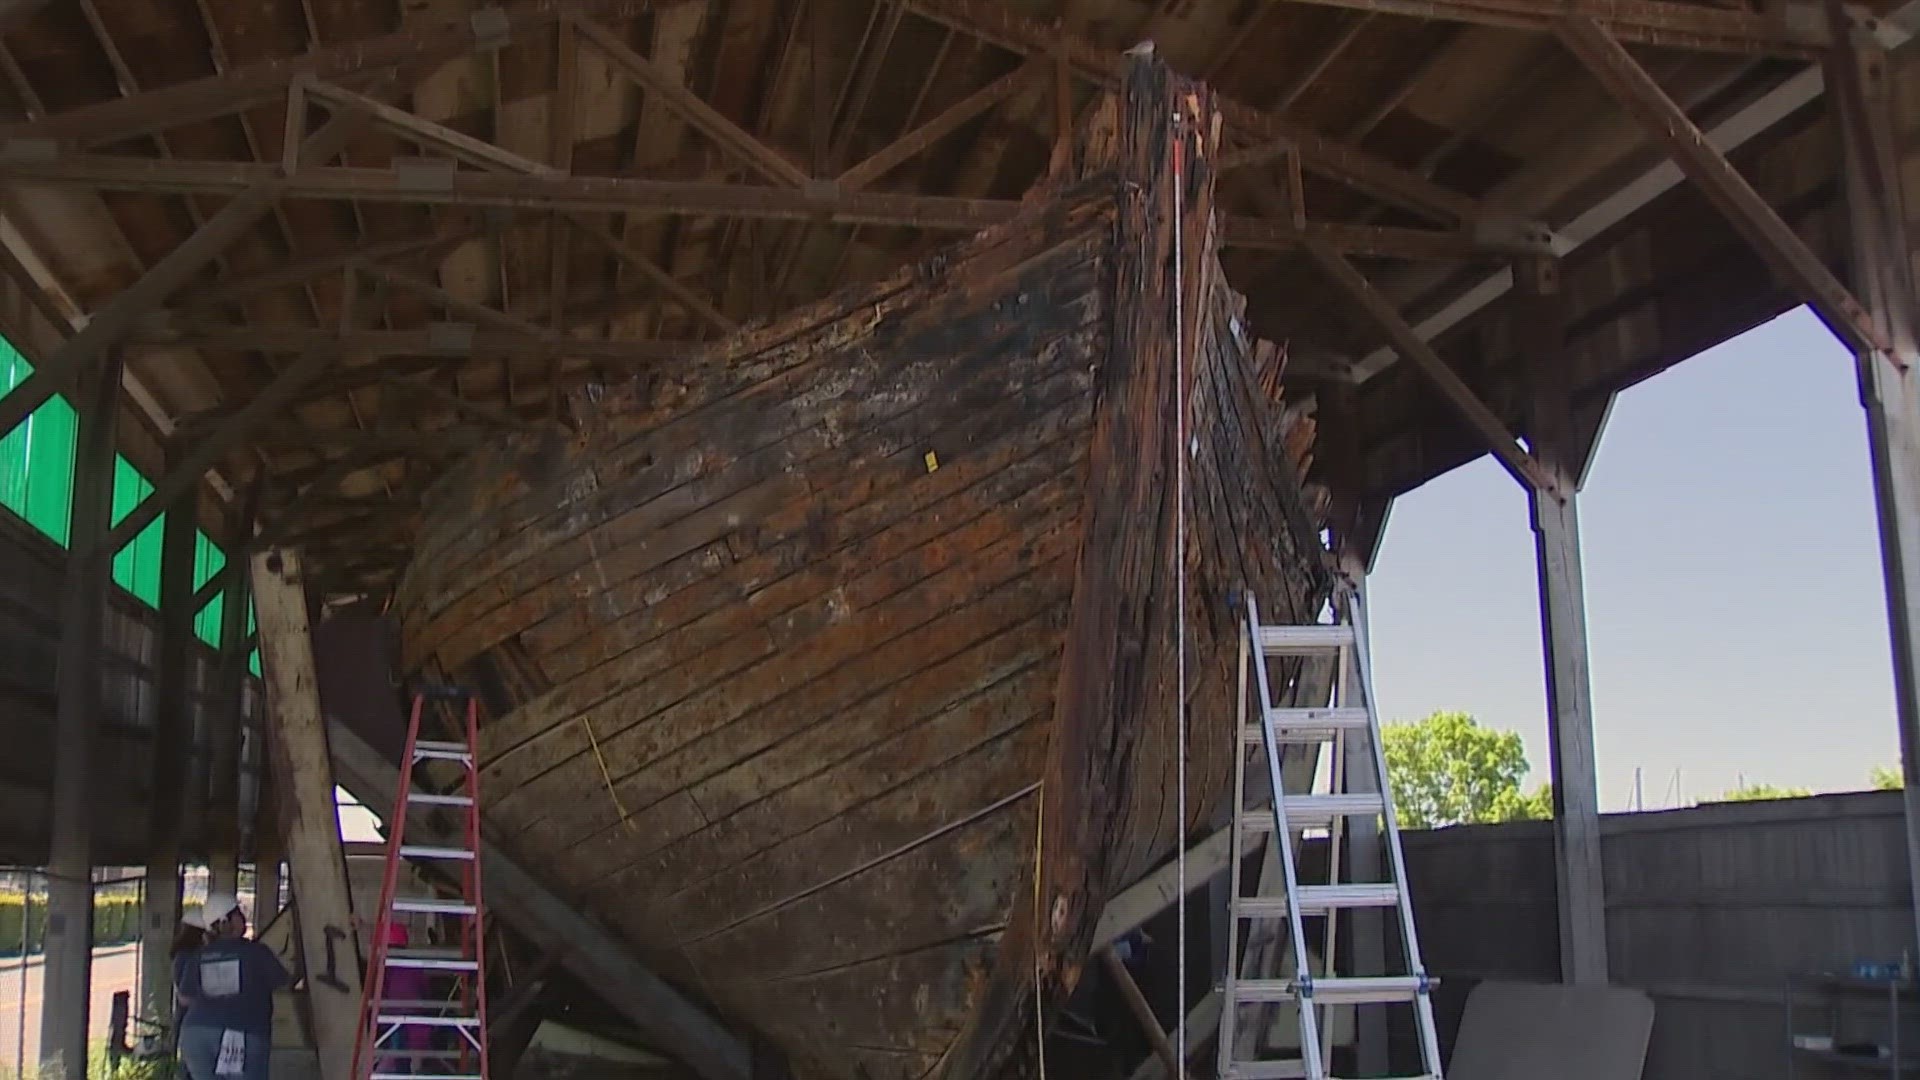 A 135-year-old ship is being taken apart after efforts to restore it failed. Now, experts are examining it to learn more about how 19th-century ships were built.